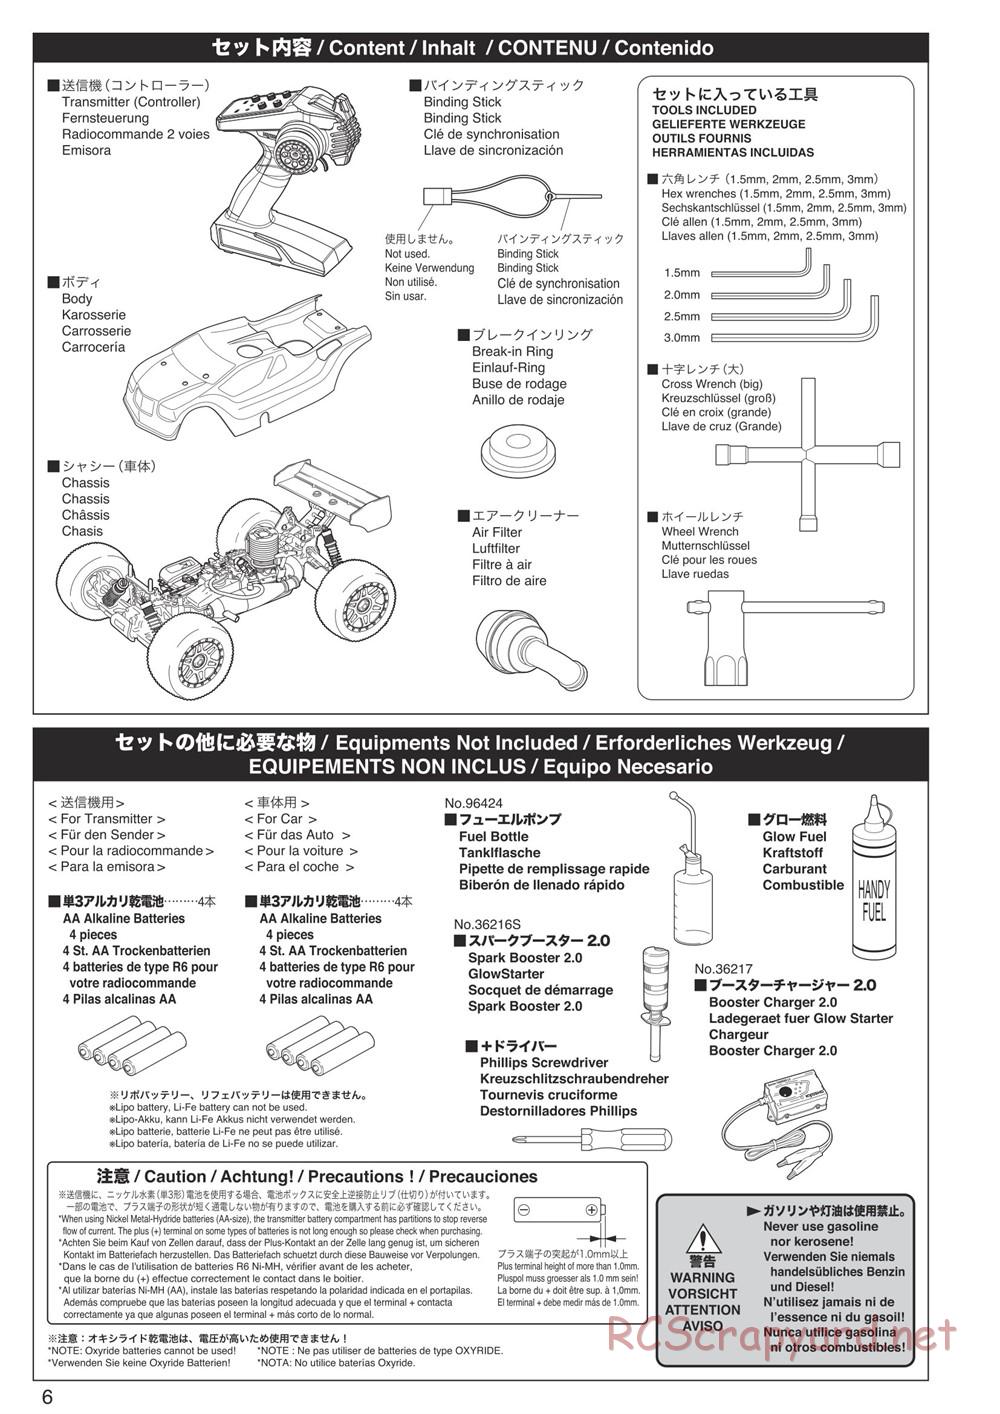 Kyosho - Inferno Neo ST 3.0 - Manual - Page 6